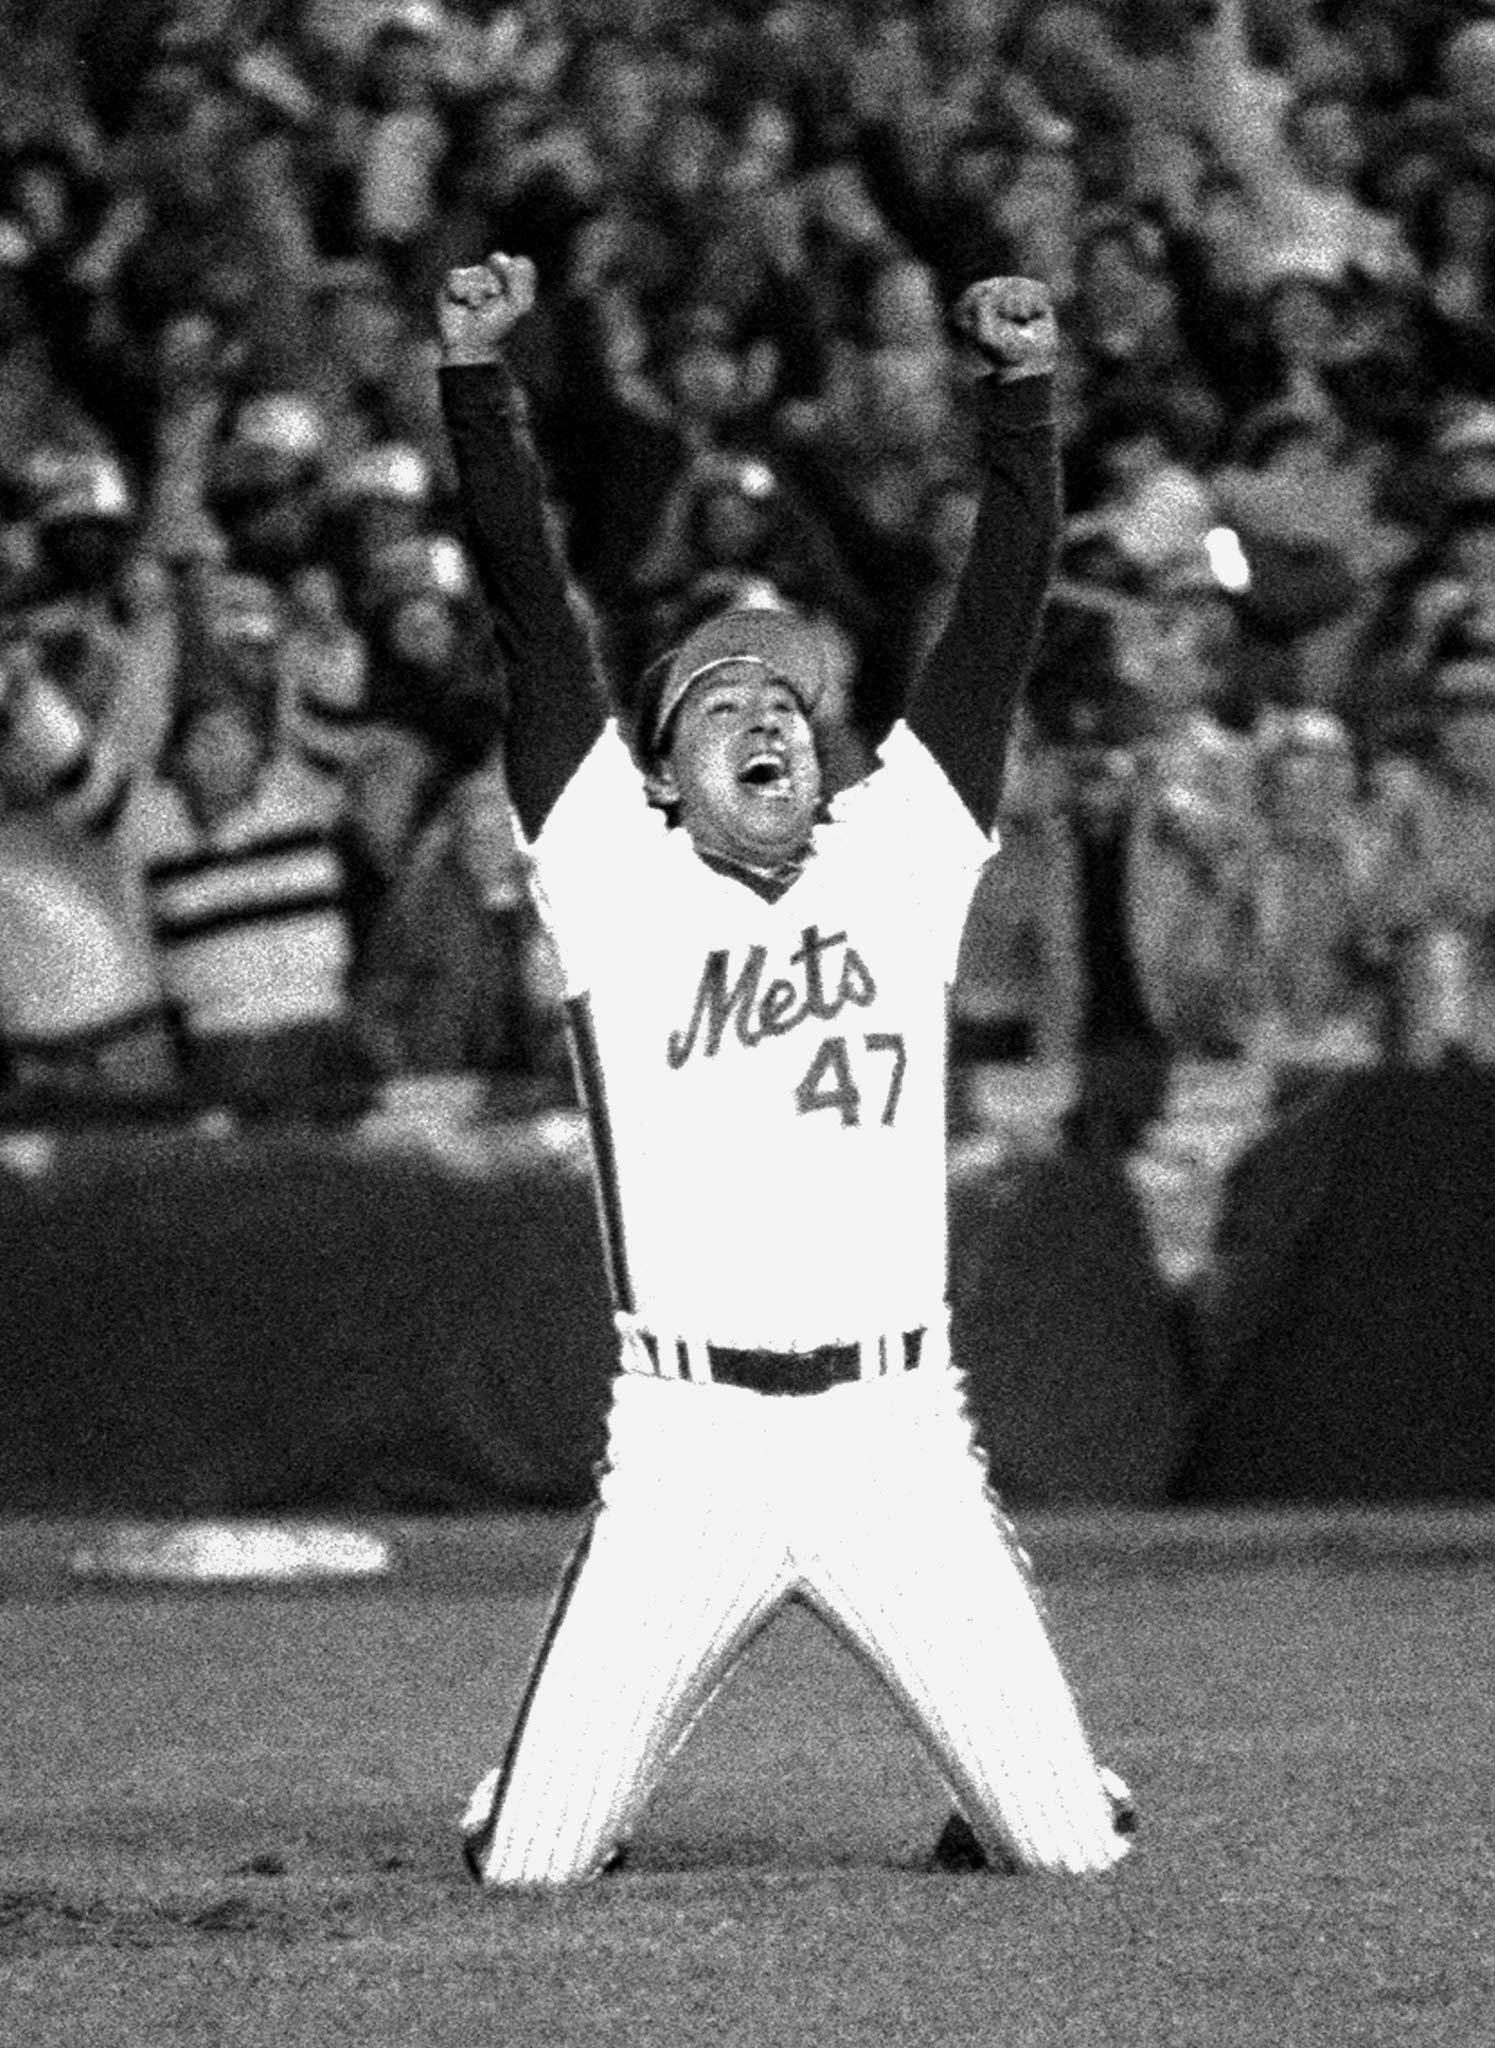 New York Mets' reliever Jesse Orosco and thousands of Met fans lift arms in jubilation as Marty Barrett, last Boston Red Sox hitter, bites dust at Shea Stadium. The Mets defeated the Red Sox, 8-5, in Game Seven of the 1986 World Series for championship on Oct. 28, 1986.